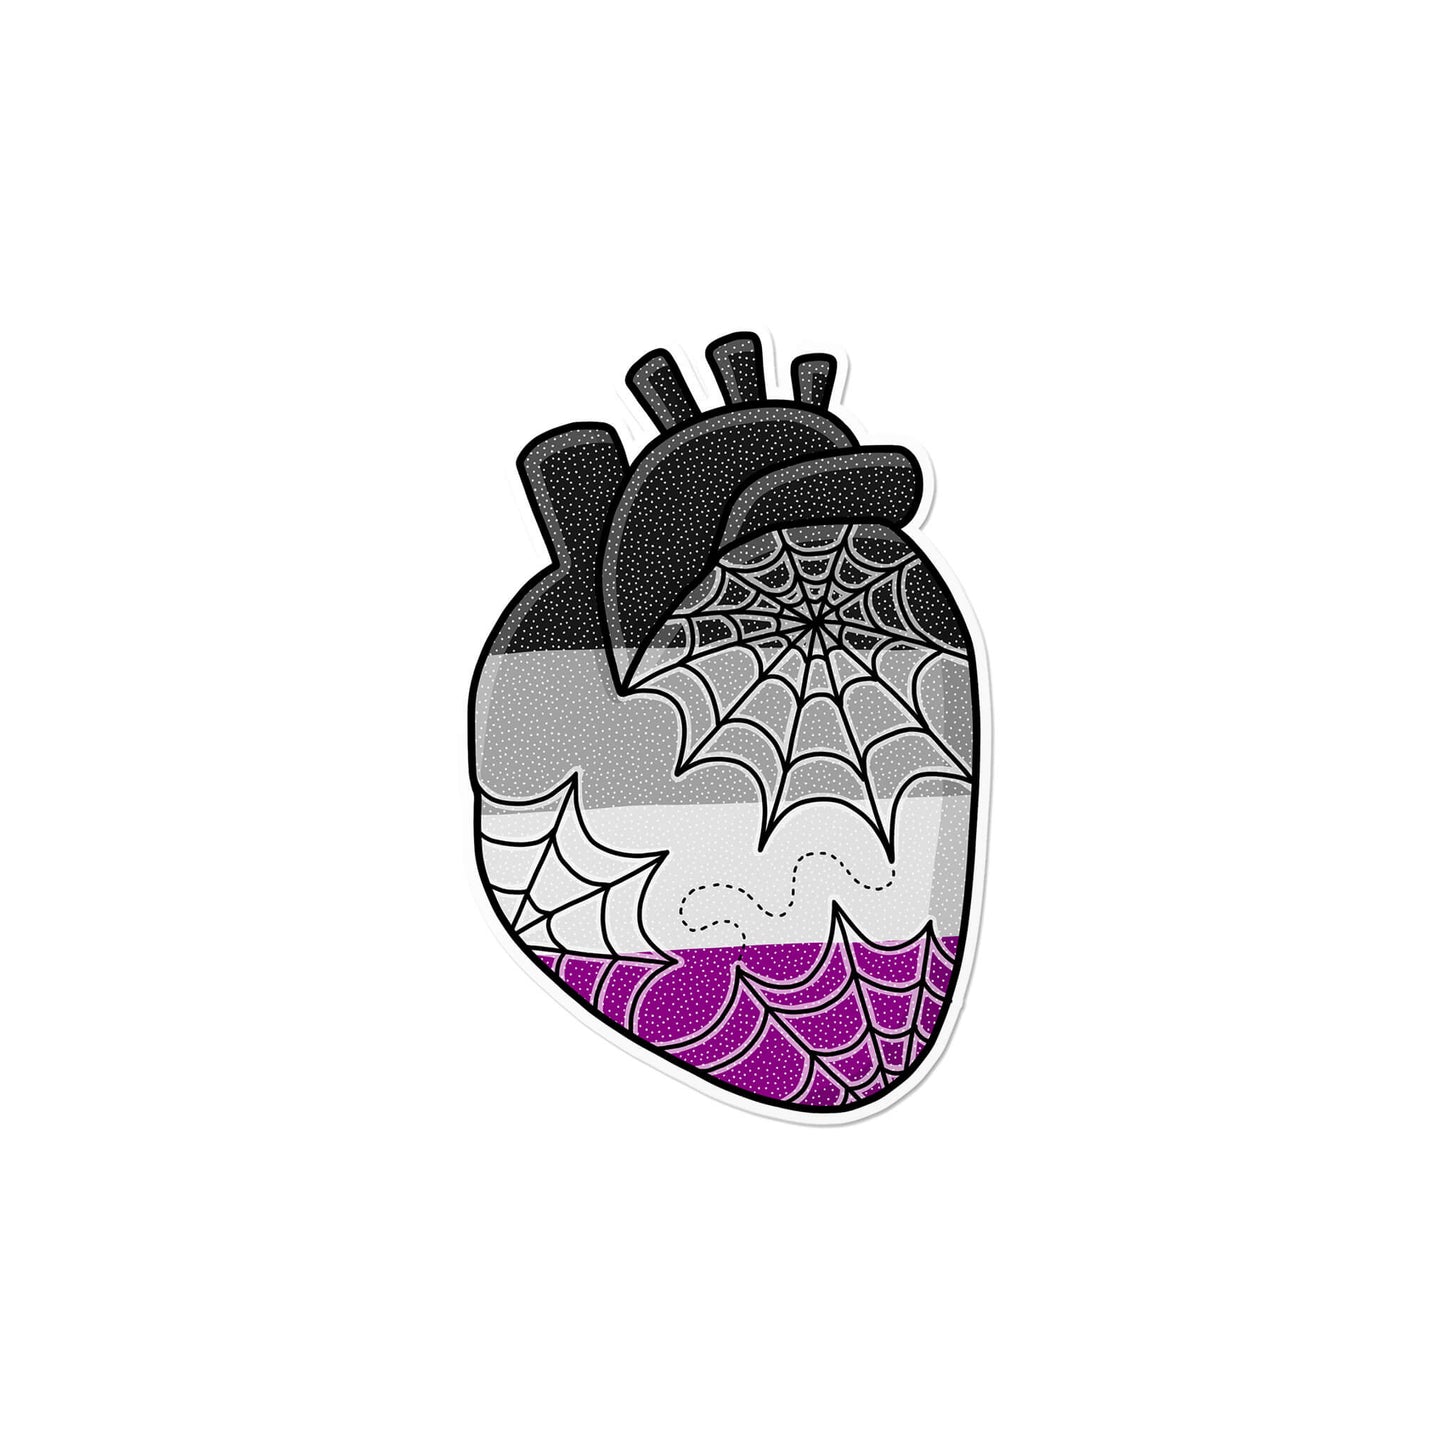 Asexual Anatomical Heart Sticker